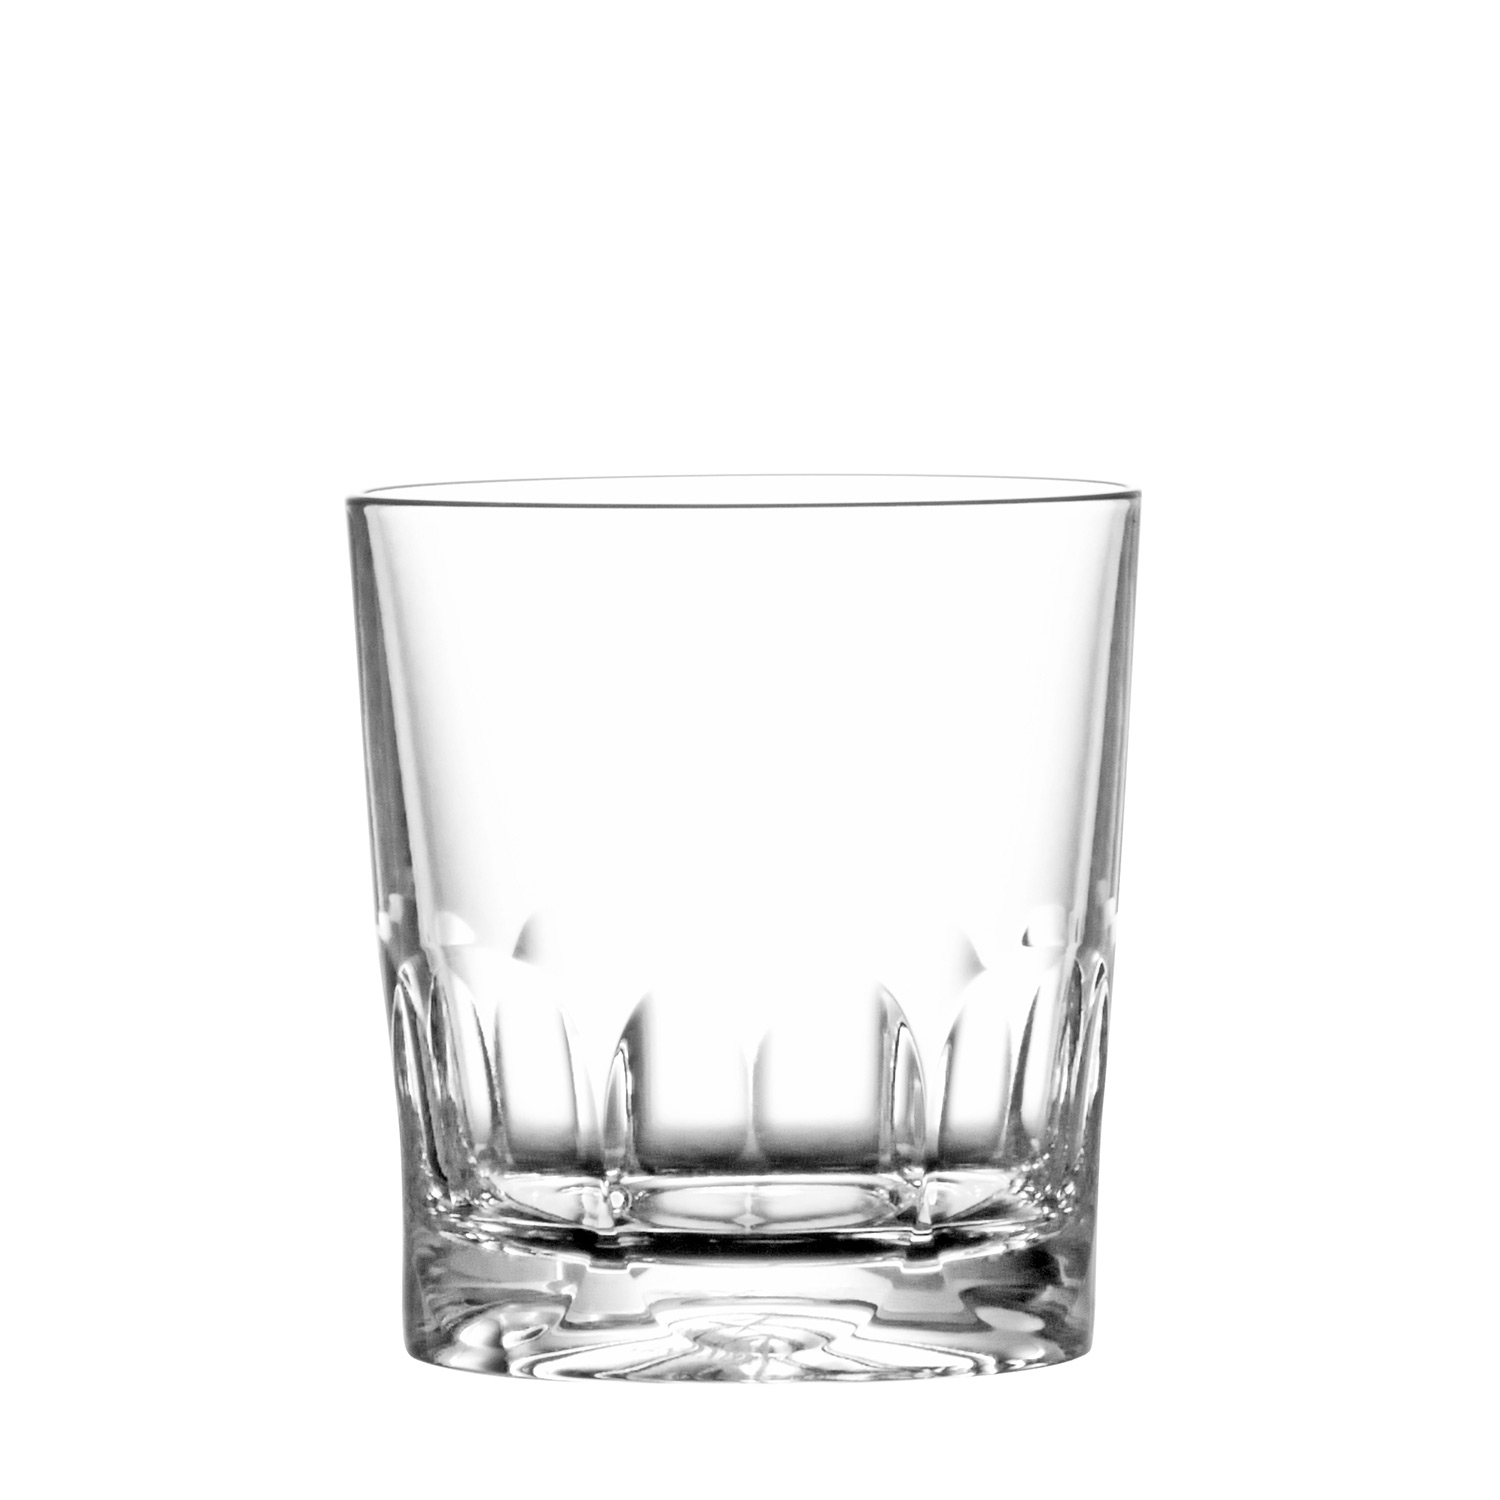 Whiskyglas Kristall Palais clear (9 cm) 2.Wahl